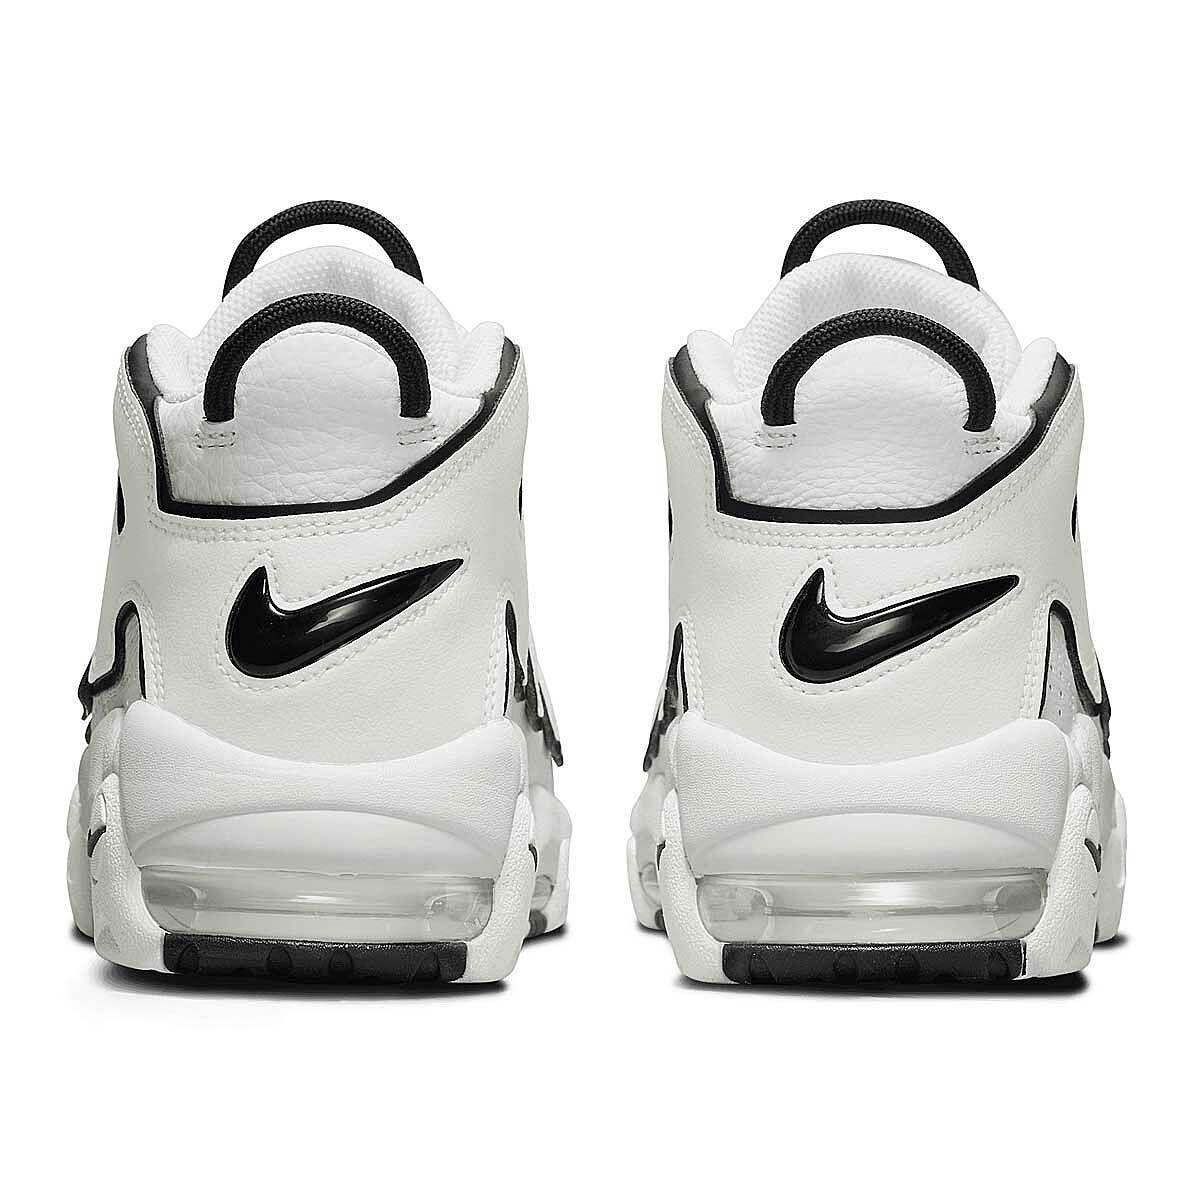 Buy WMNS AIR MORE UPTEMPO for EUR 139.90 on KICKZ.com!